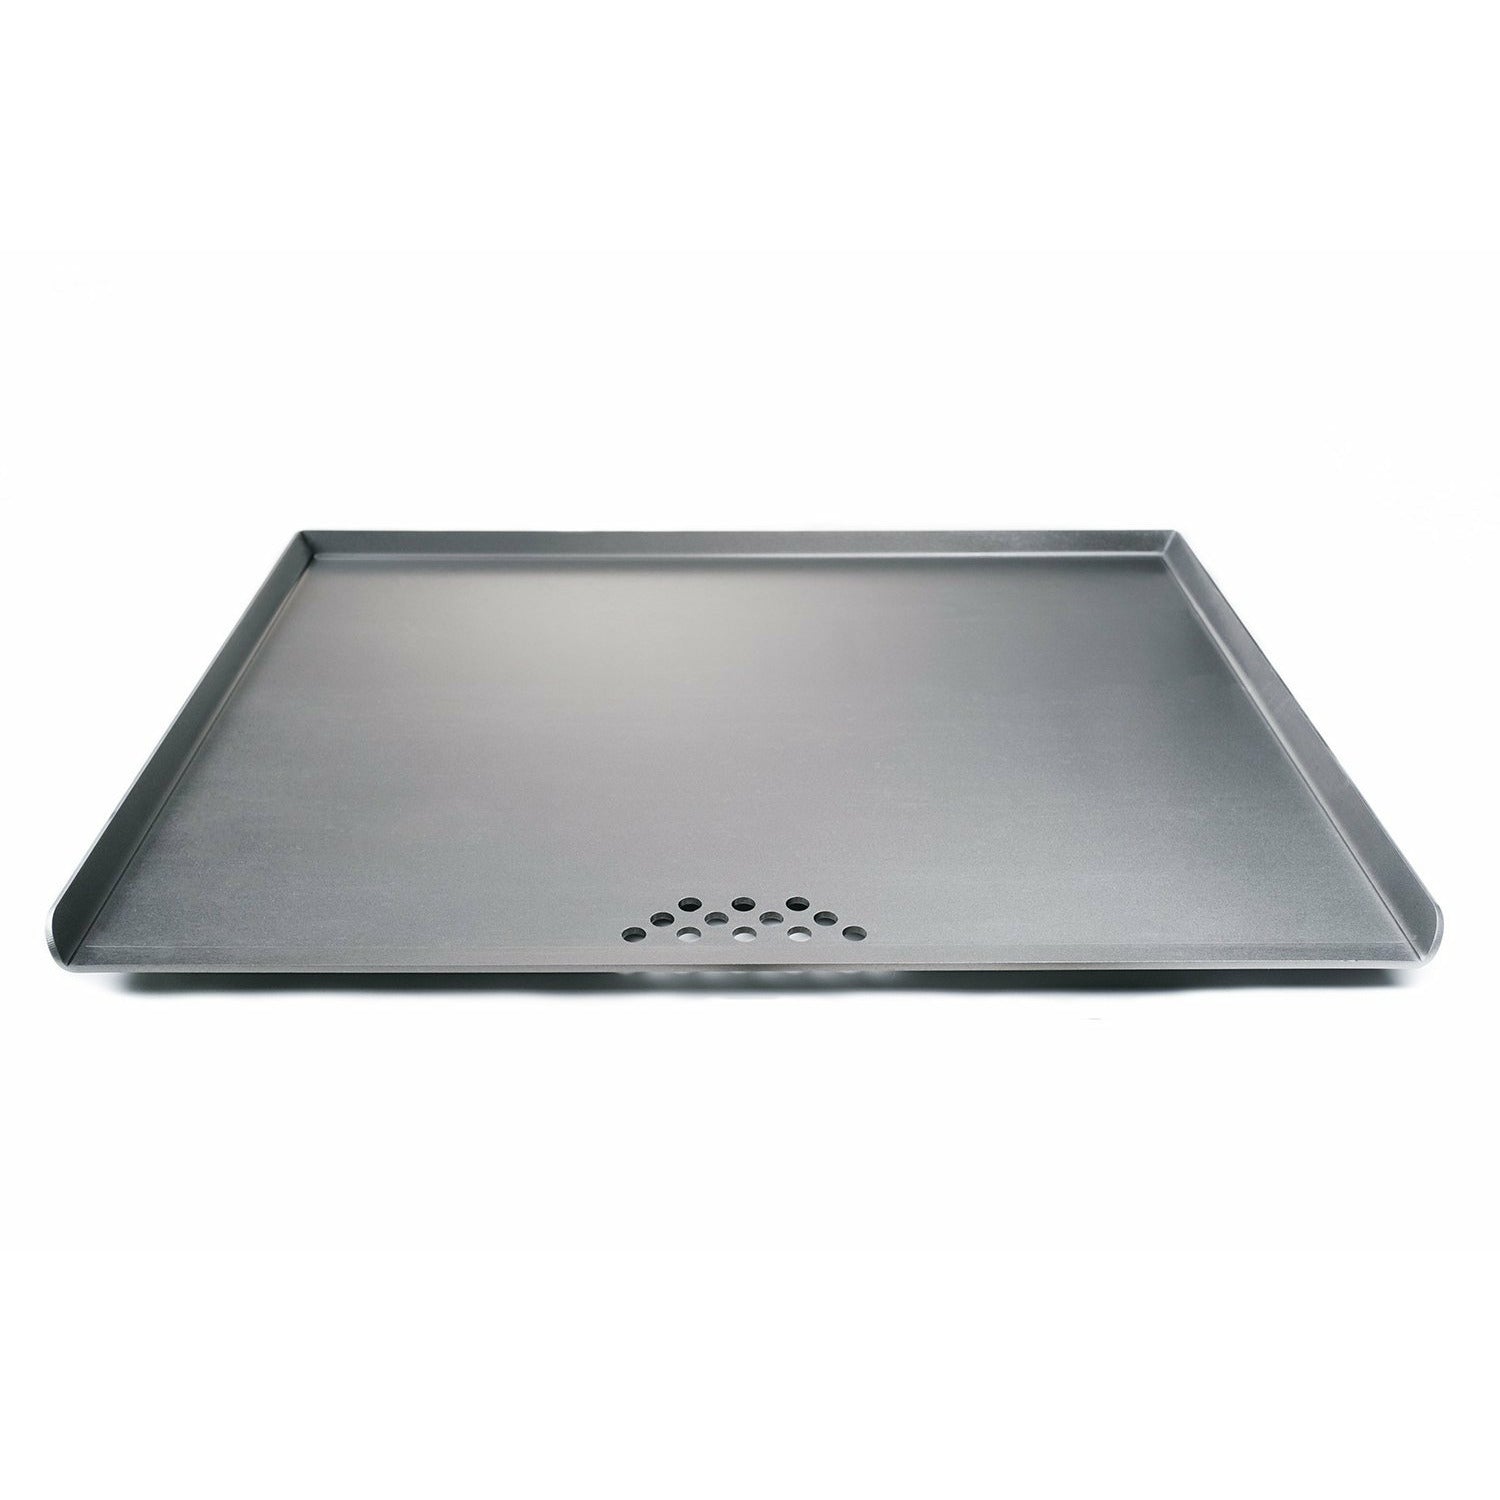  Stove Top Covers (31 x 24), Heat Resistant Glass Top